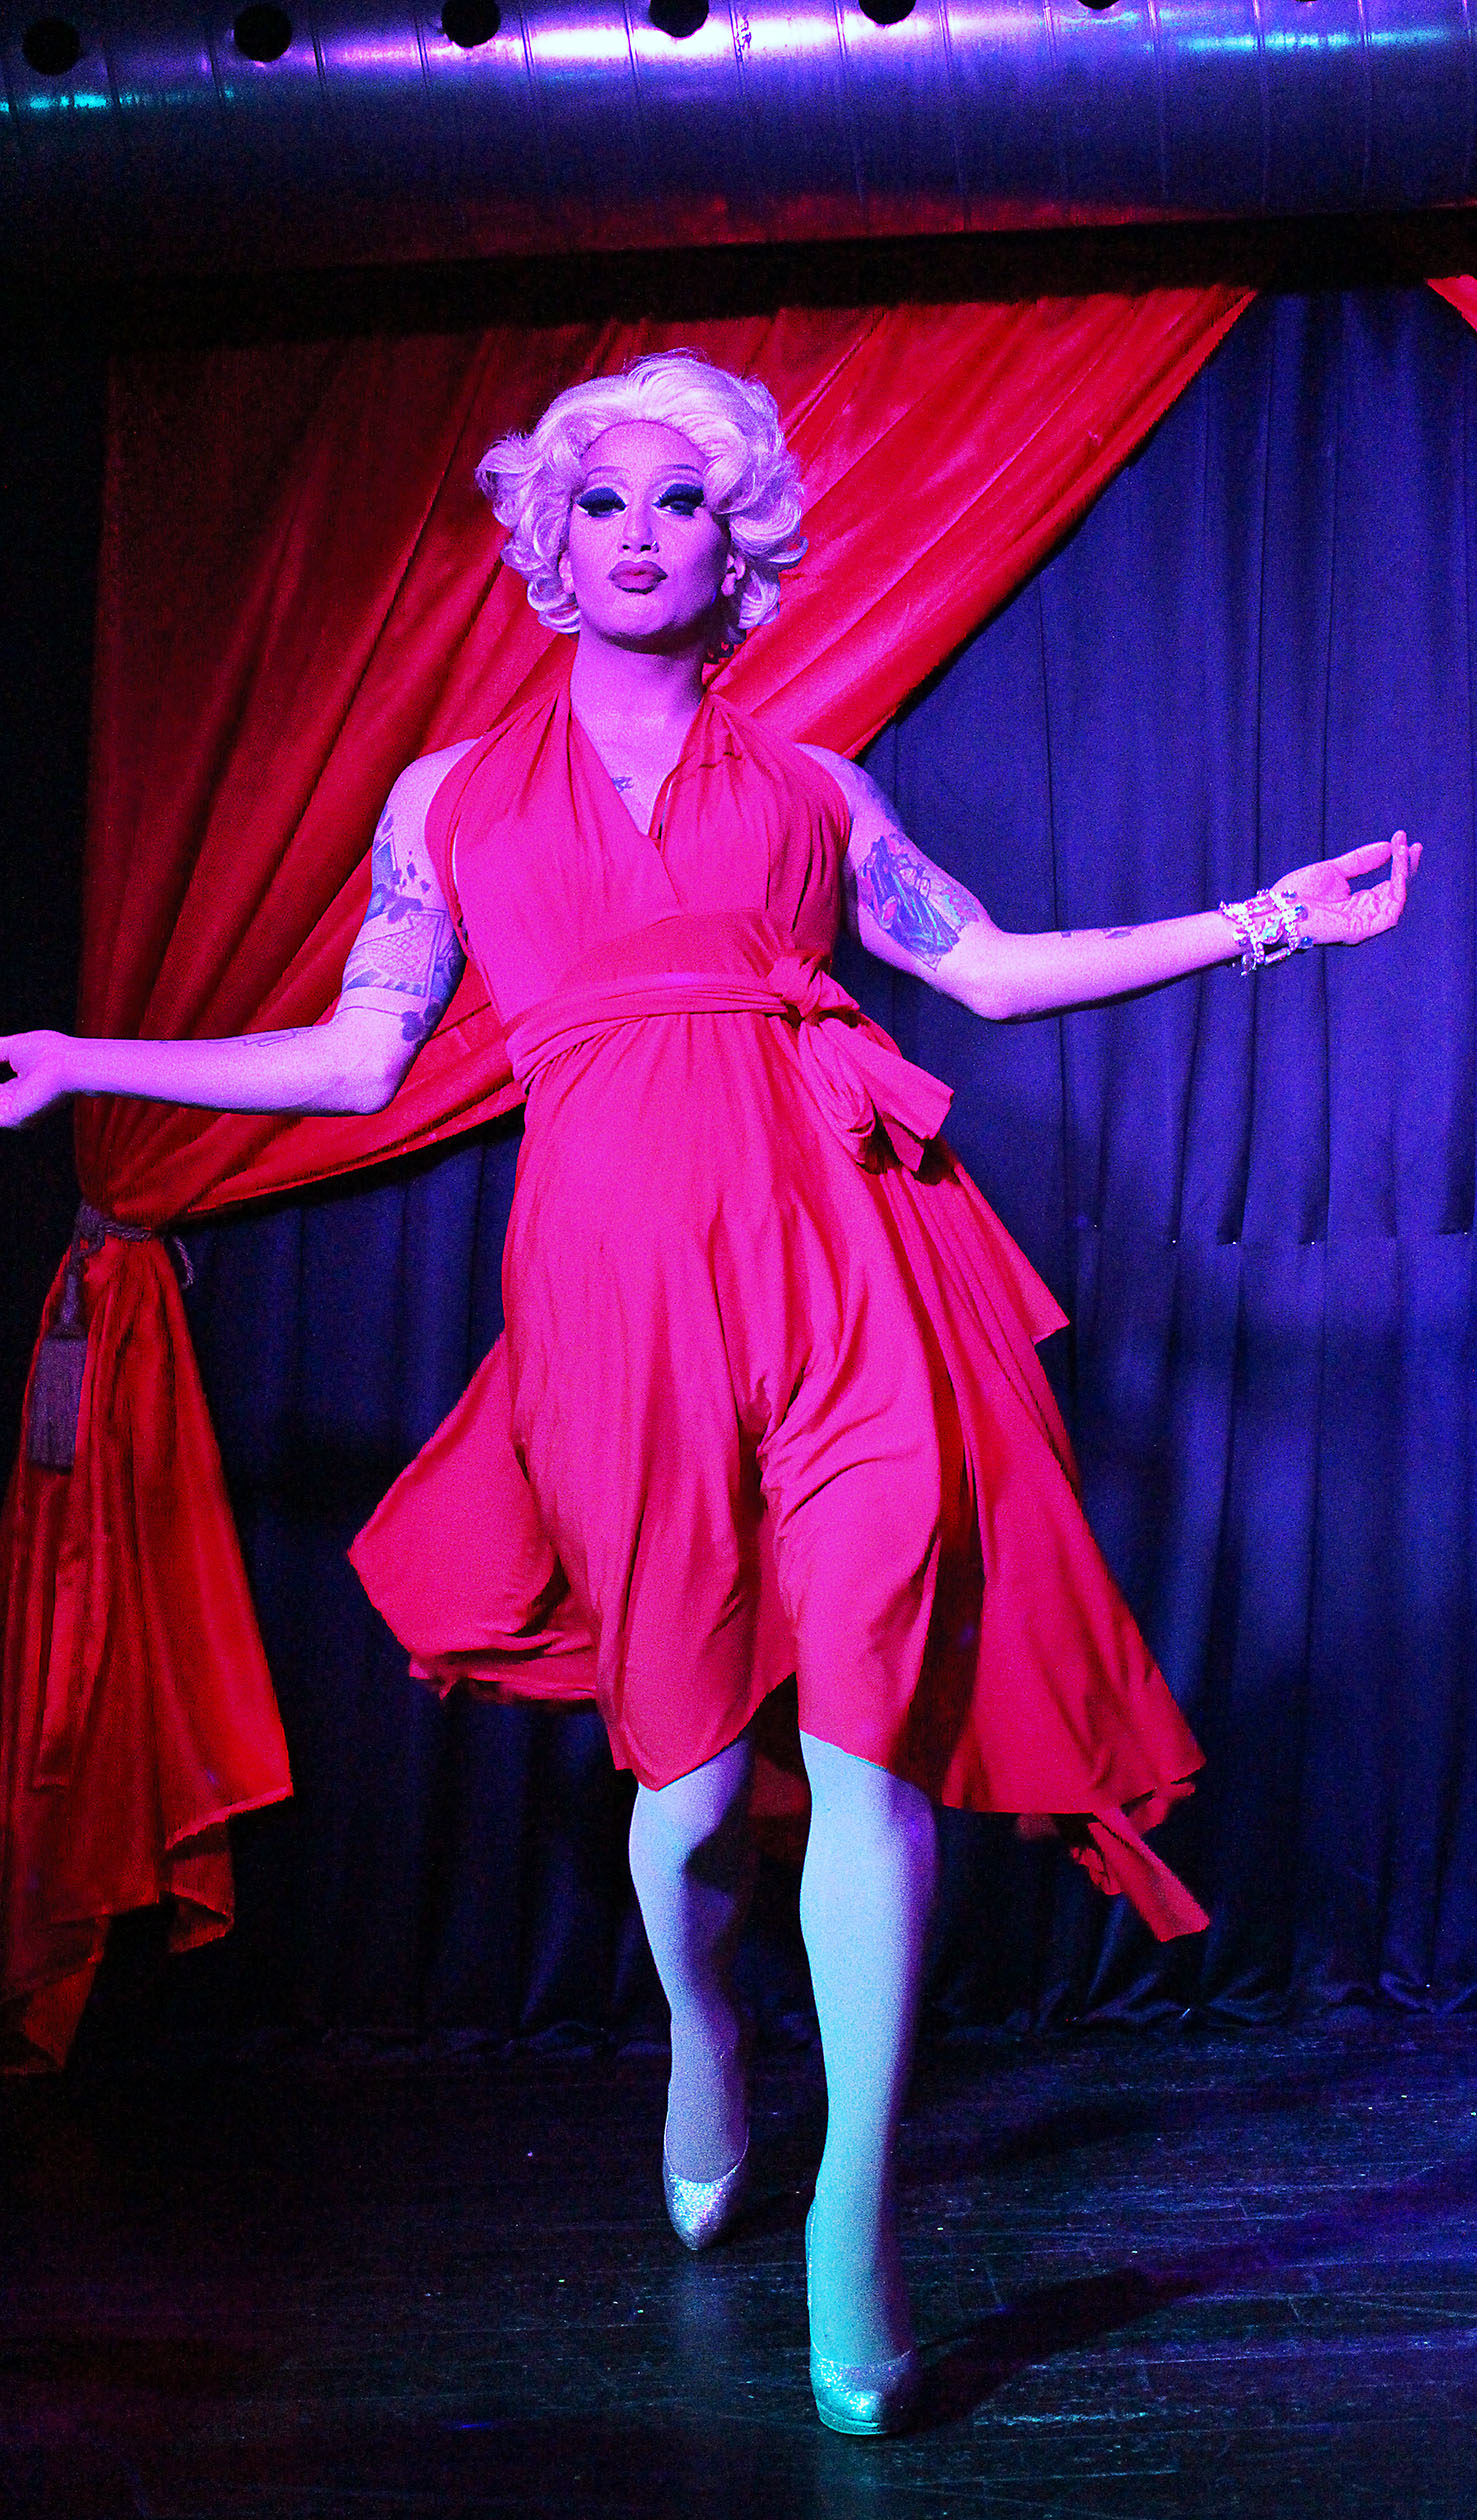 Scarlett Bobo on stage in a red outfit, with red curtains in the background.